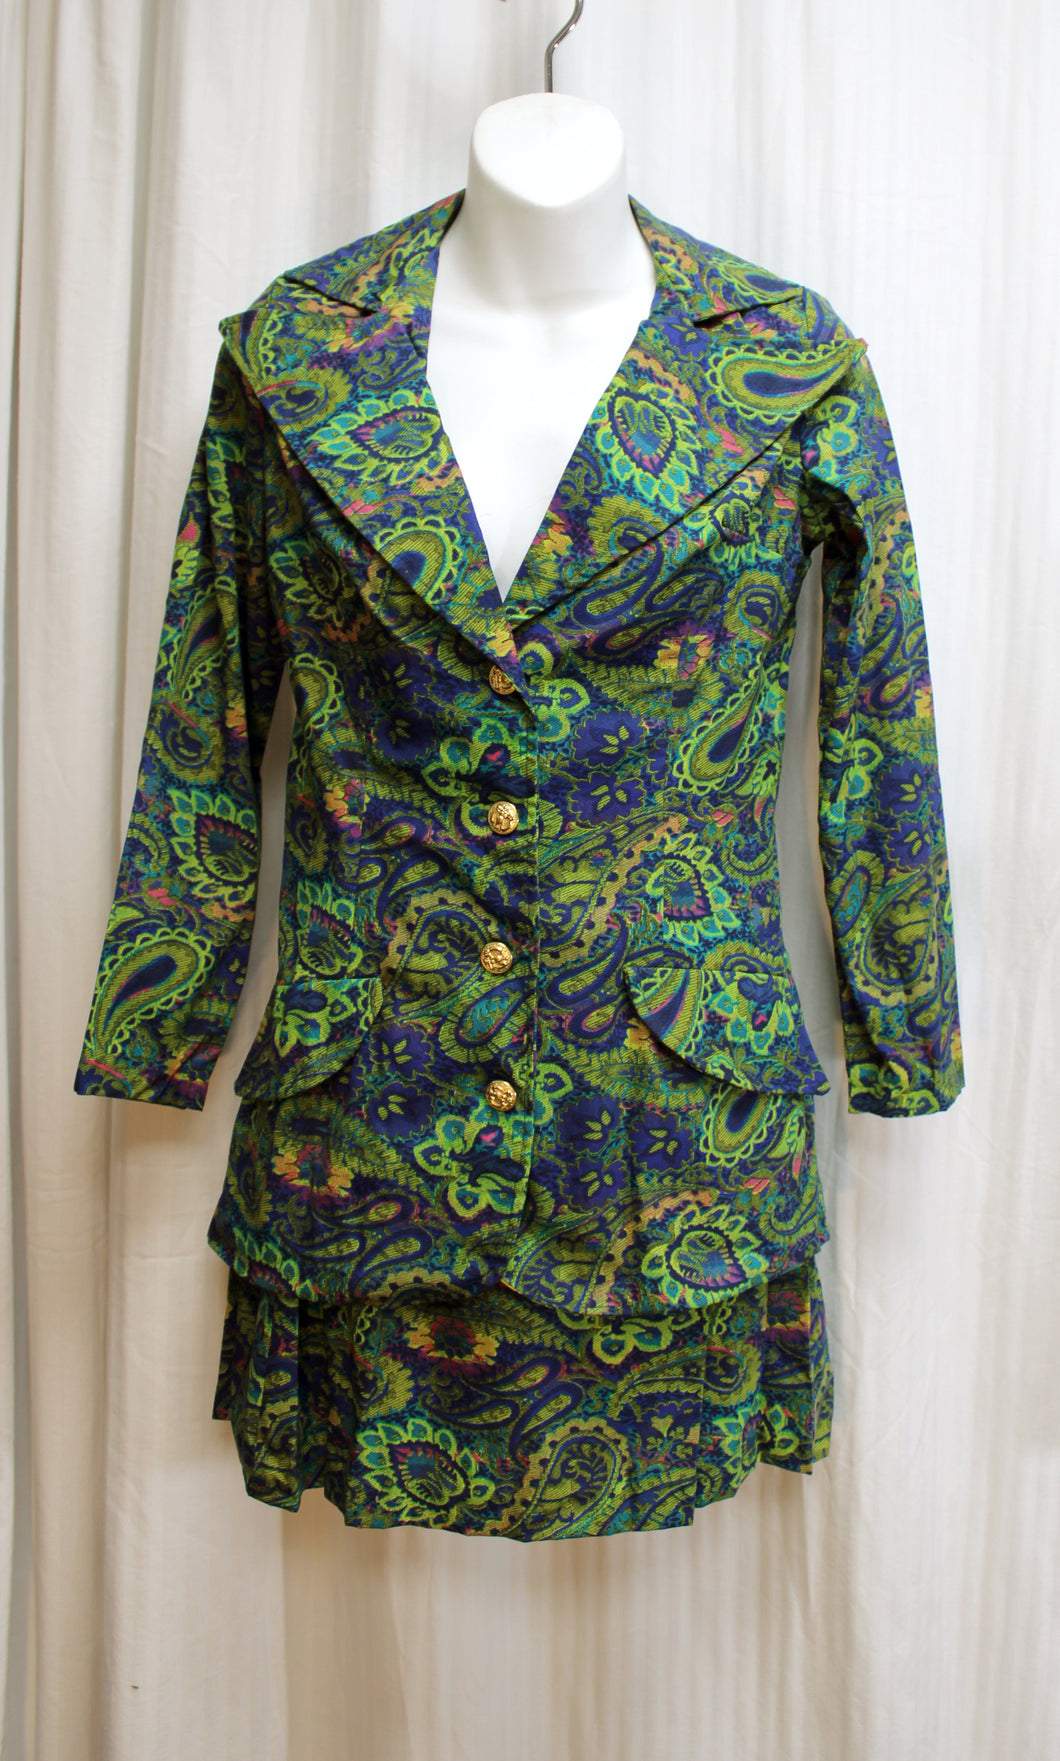 Vintage 60's/70's - Colorful Paisley Jacket & Matching Mini Skirt - See Measurements 21.5